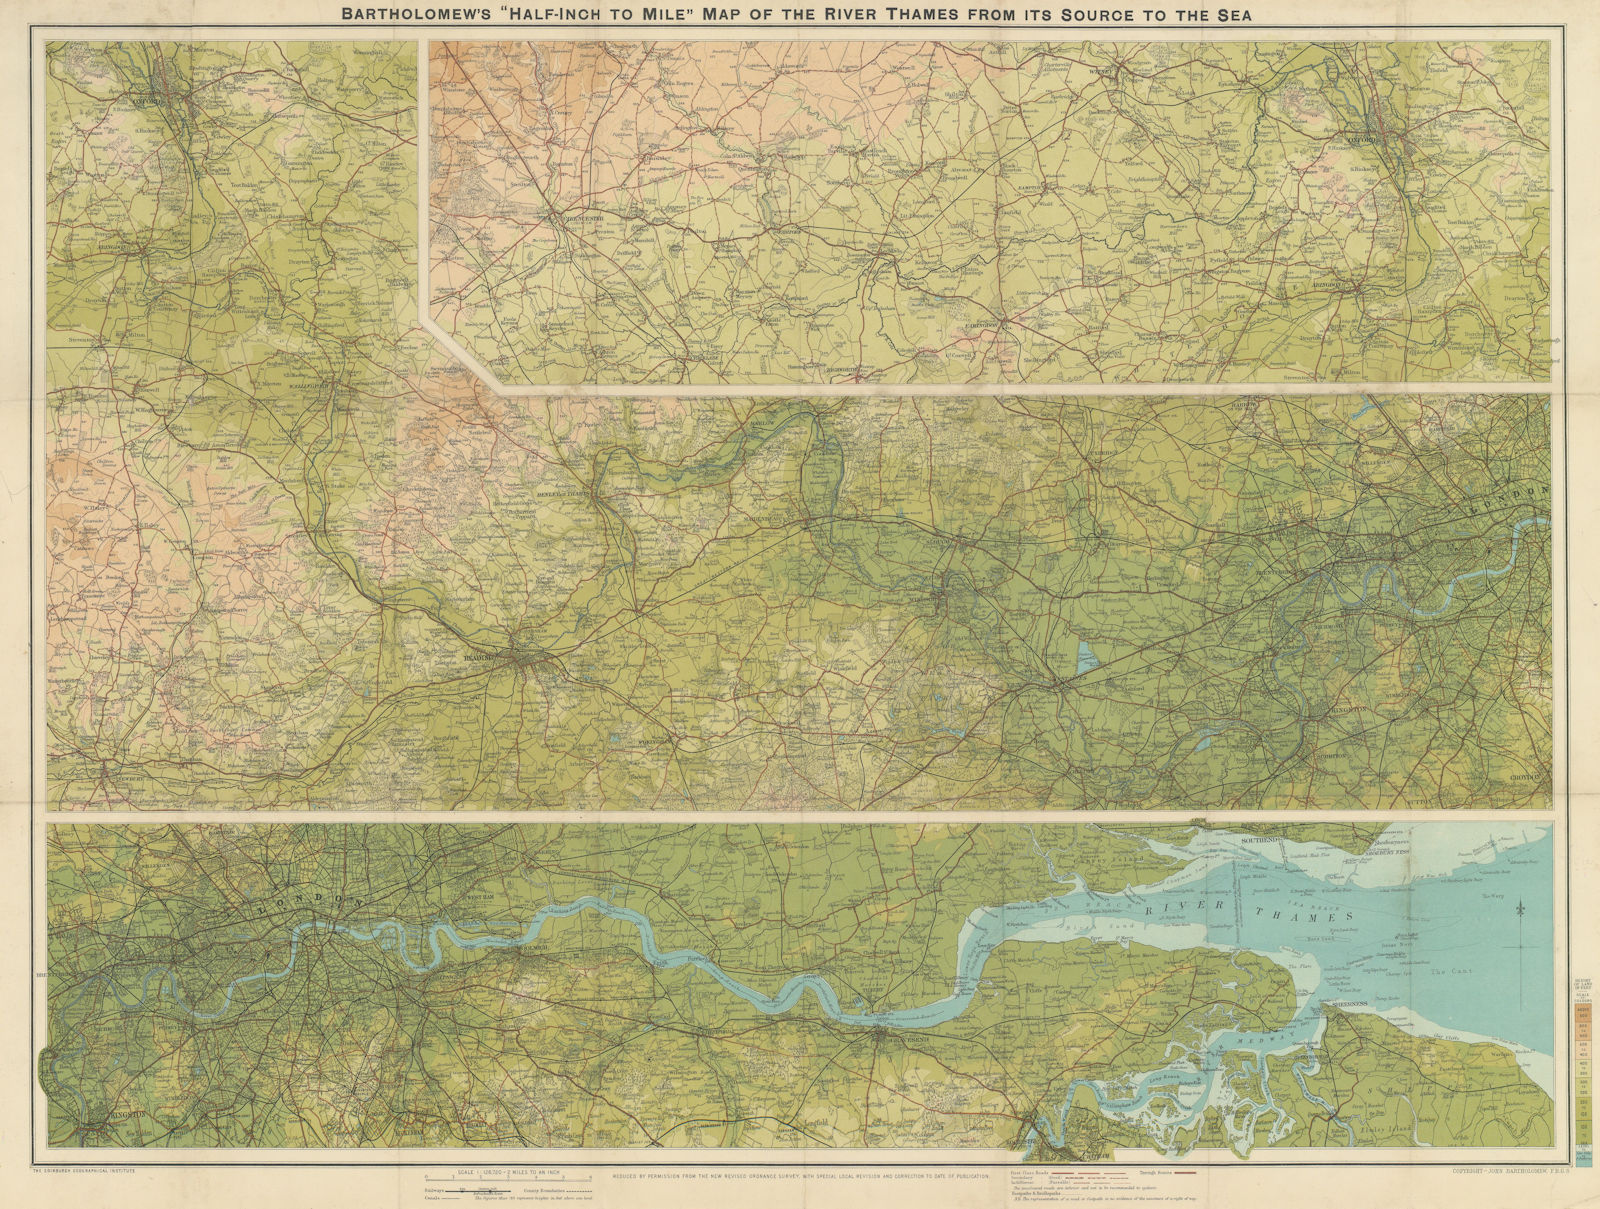 River Thames from source to sea. Thames valley. 56x74cm BARTHOLOMEW c1905 map